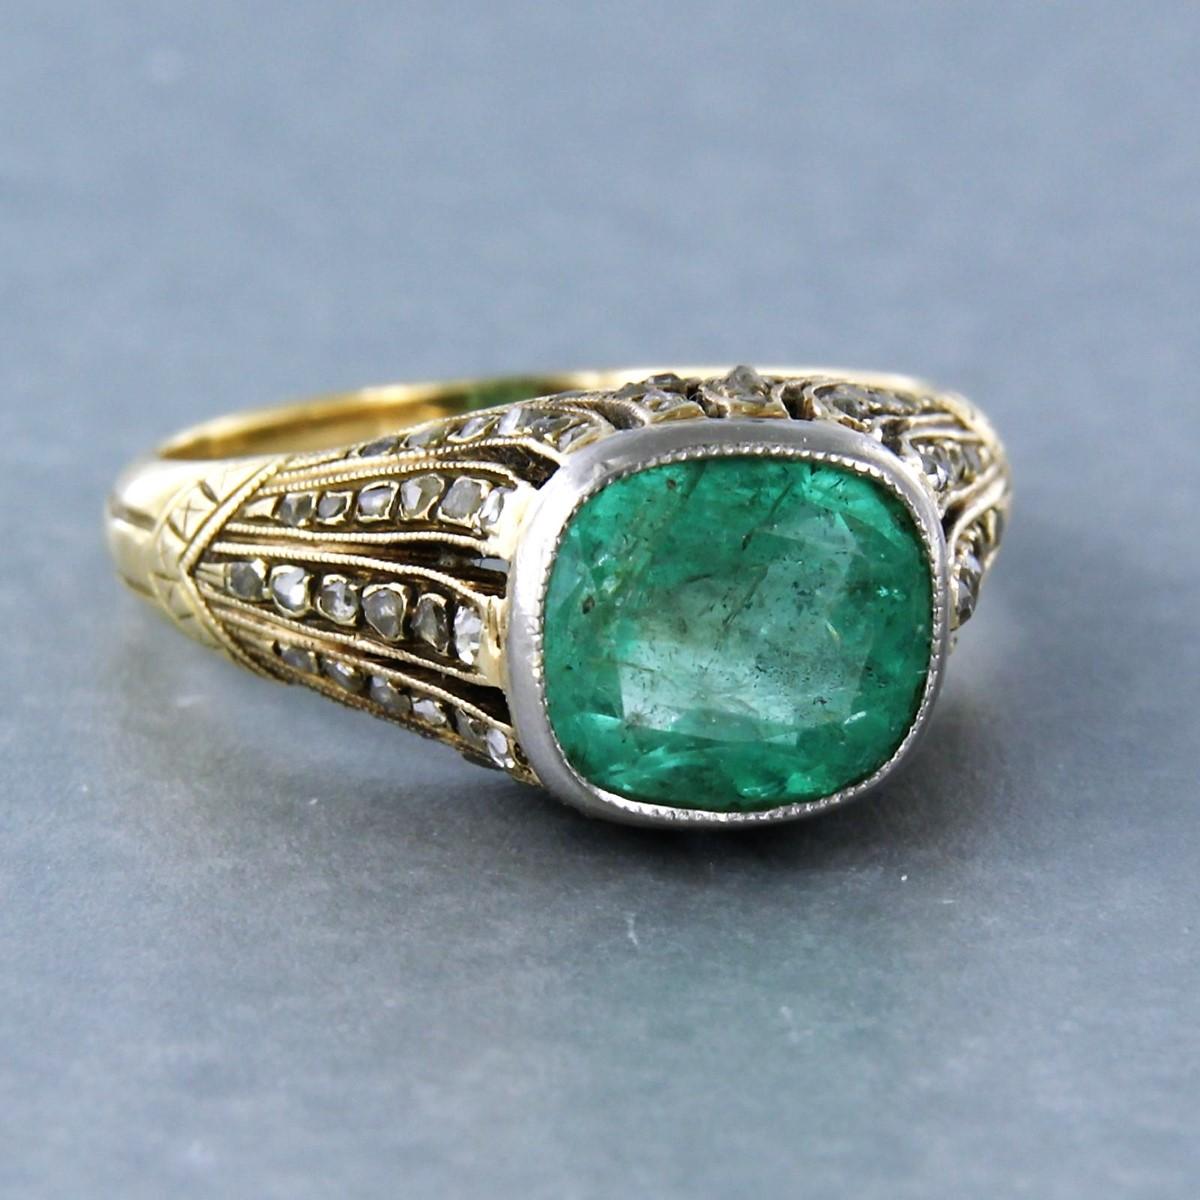 Emerald Cut Ring with emerald and diamonds 14k yellow gold For Sale